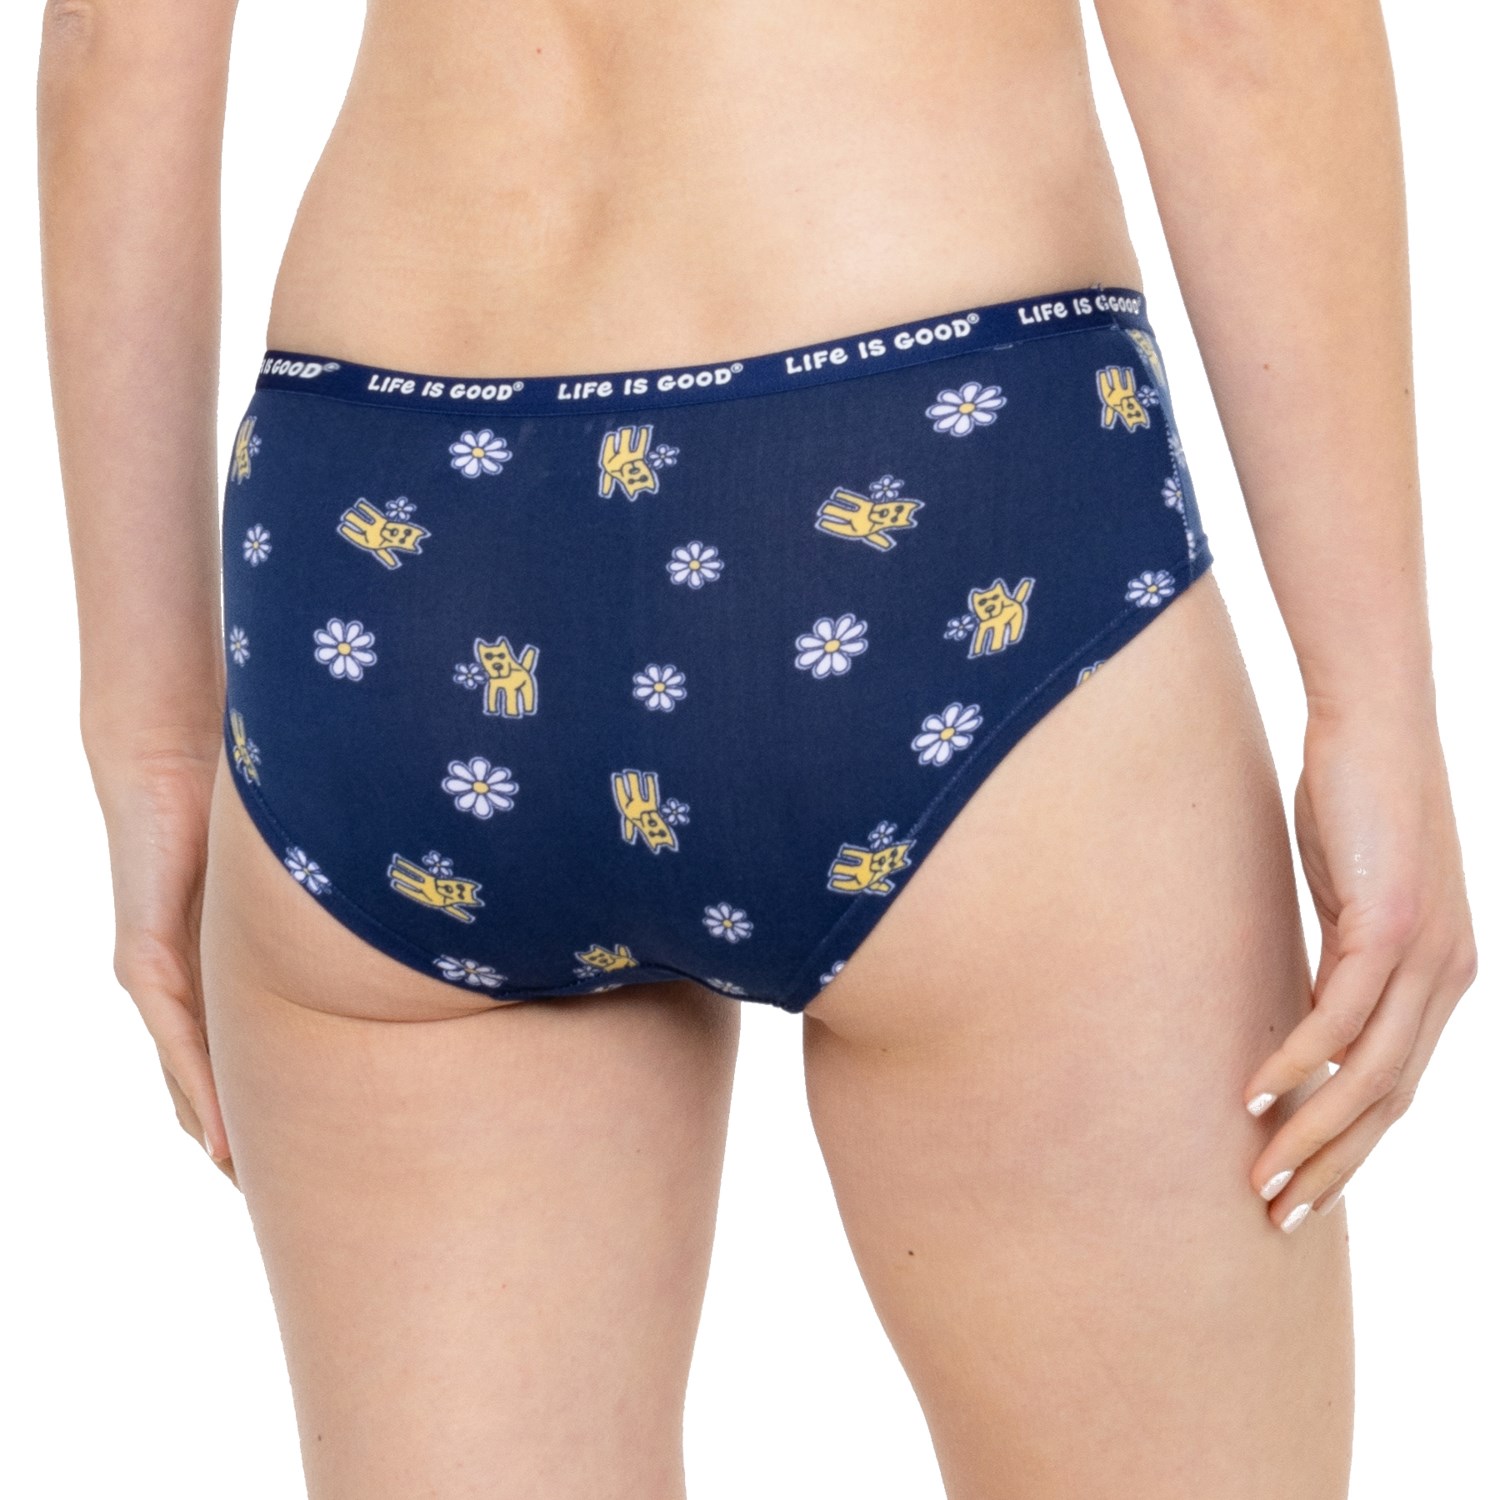  Life is Good Girls' Underwear - Casual Stretch Hipster